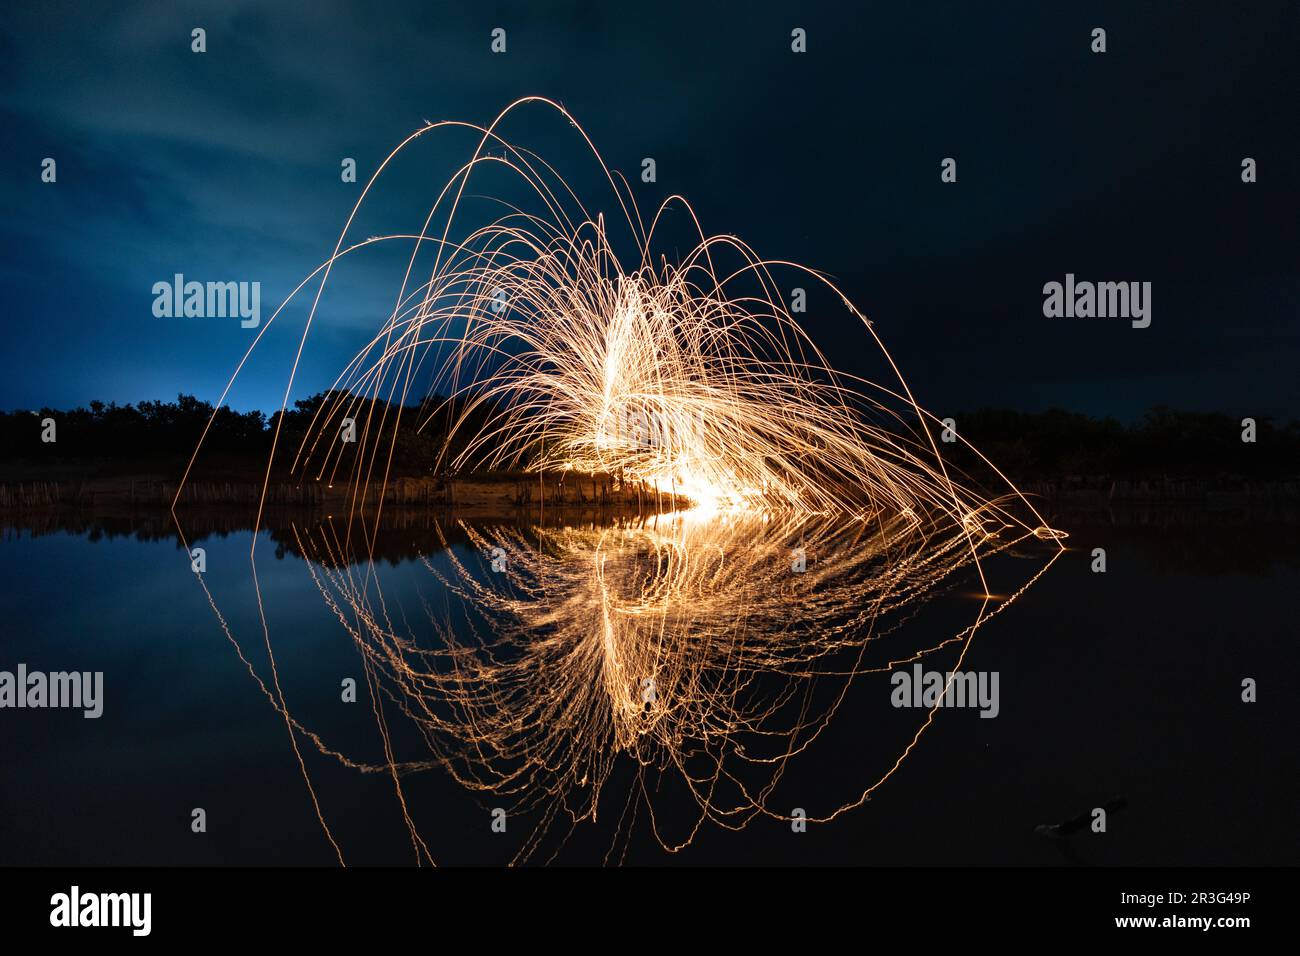 Beautiful figures and flashes of light painting reflected in a lake at night. Stock Photo